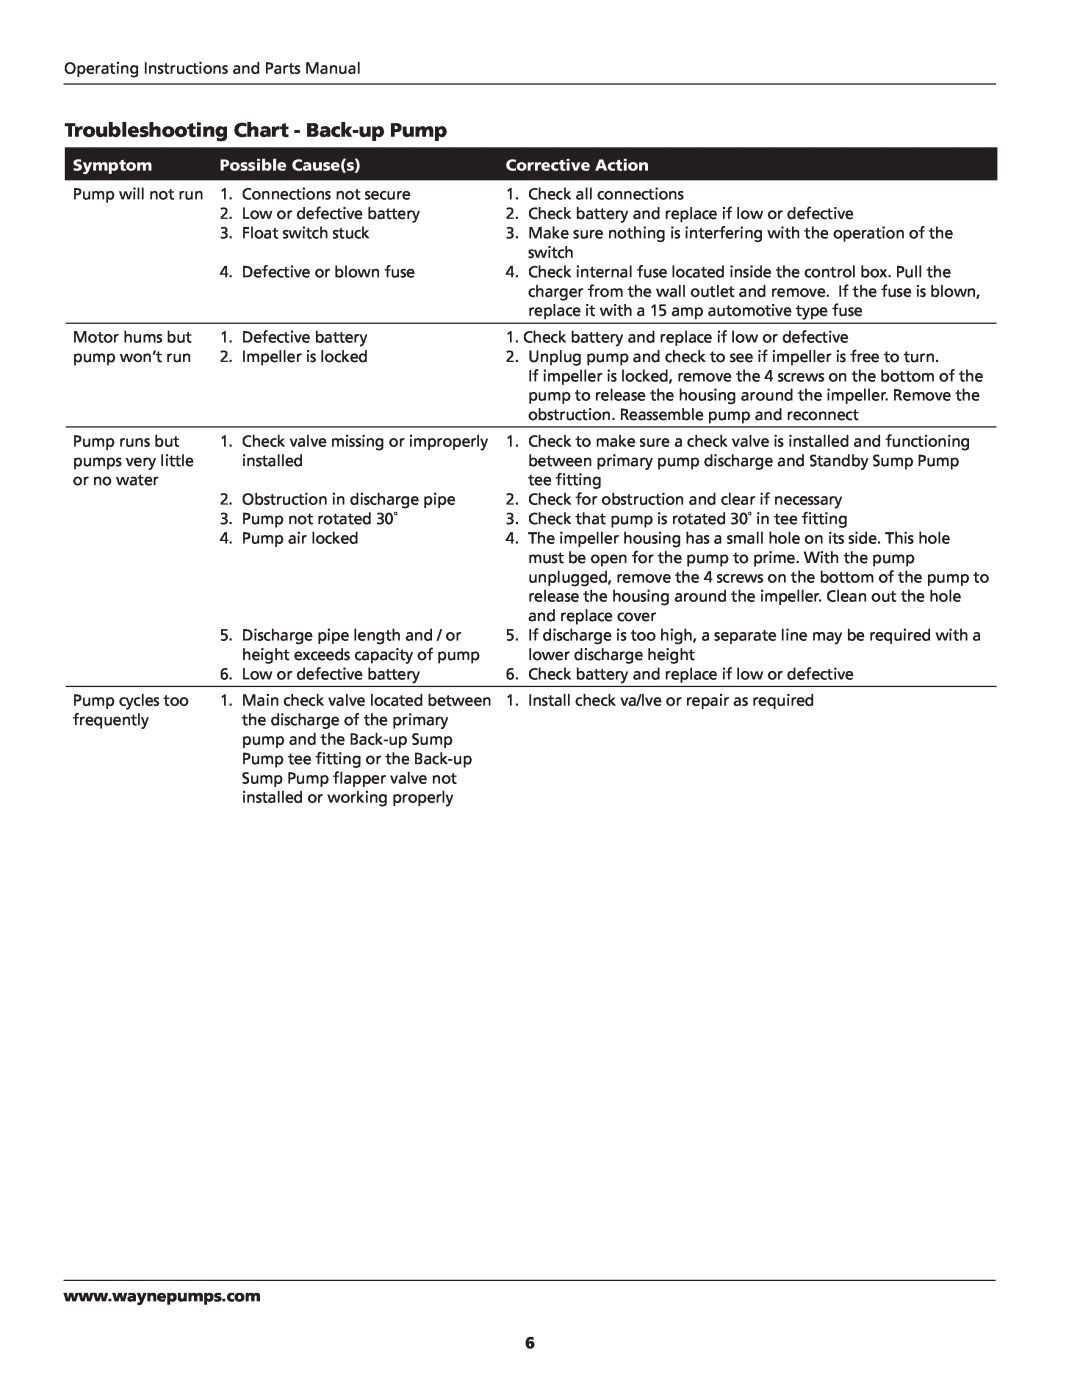 Wayne WSS30, WSS10, WSS20, 353501-001 Troubleshooting Chart - Back-upPump, Symptom, Possible Causes, Corrective Action 